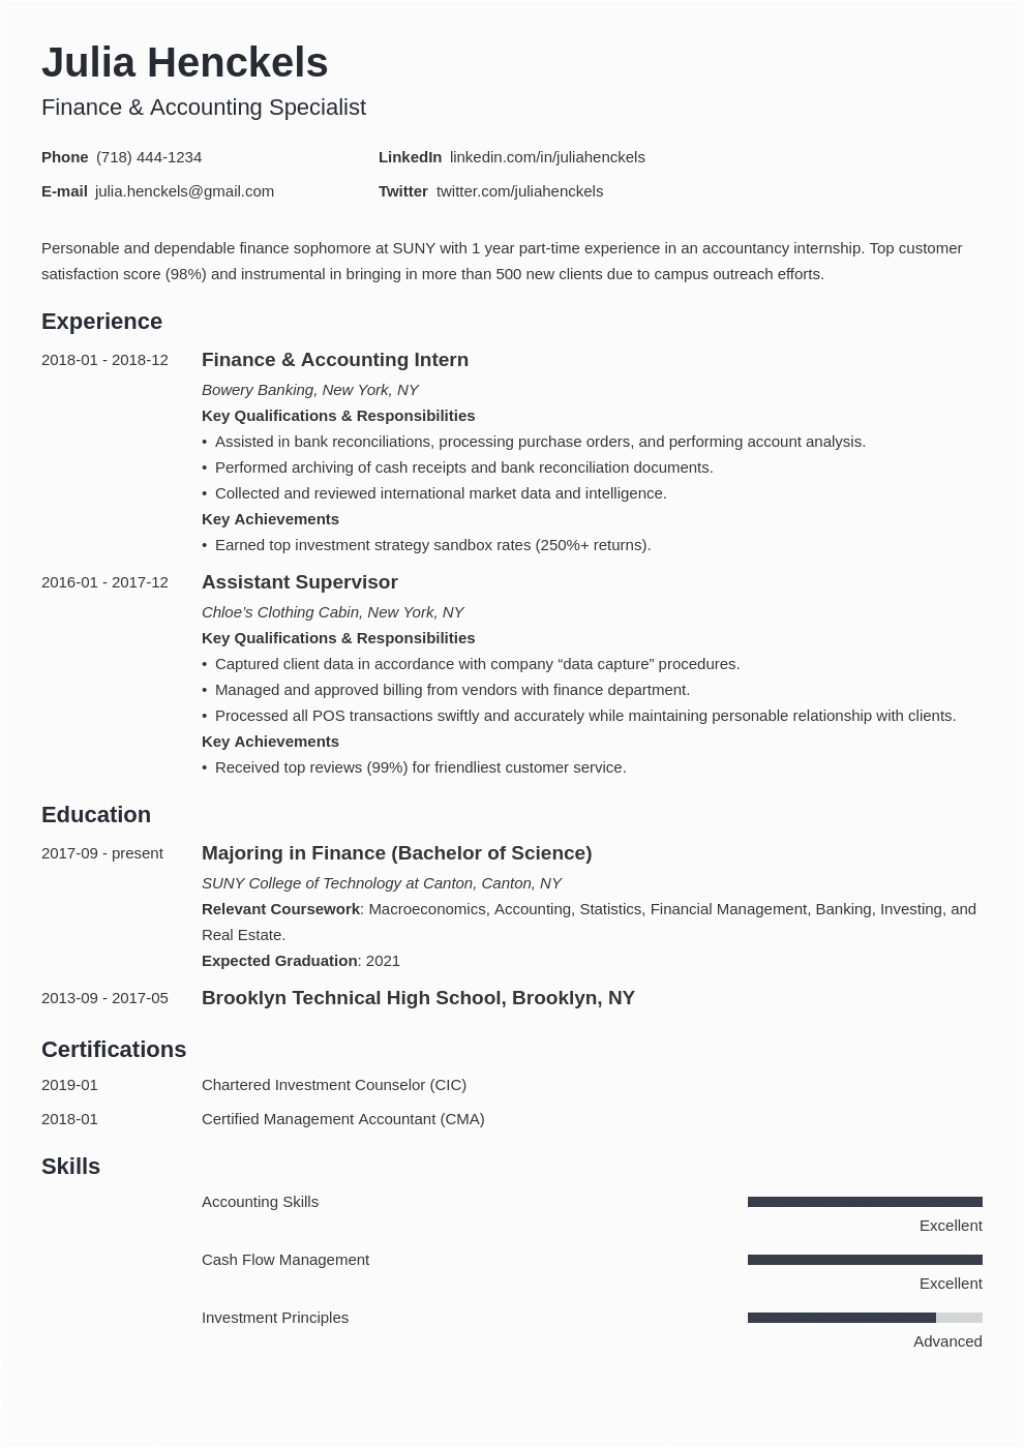 Resume Samples for On Campus Jobs 7 Cool College Resume Builder Media Examples